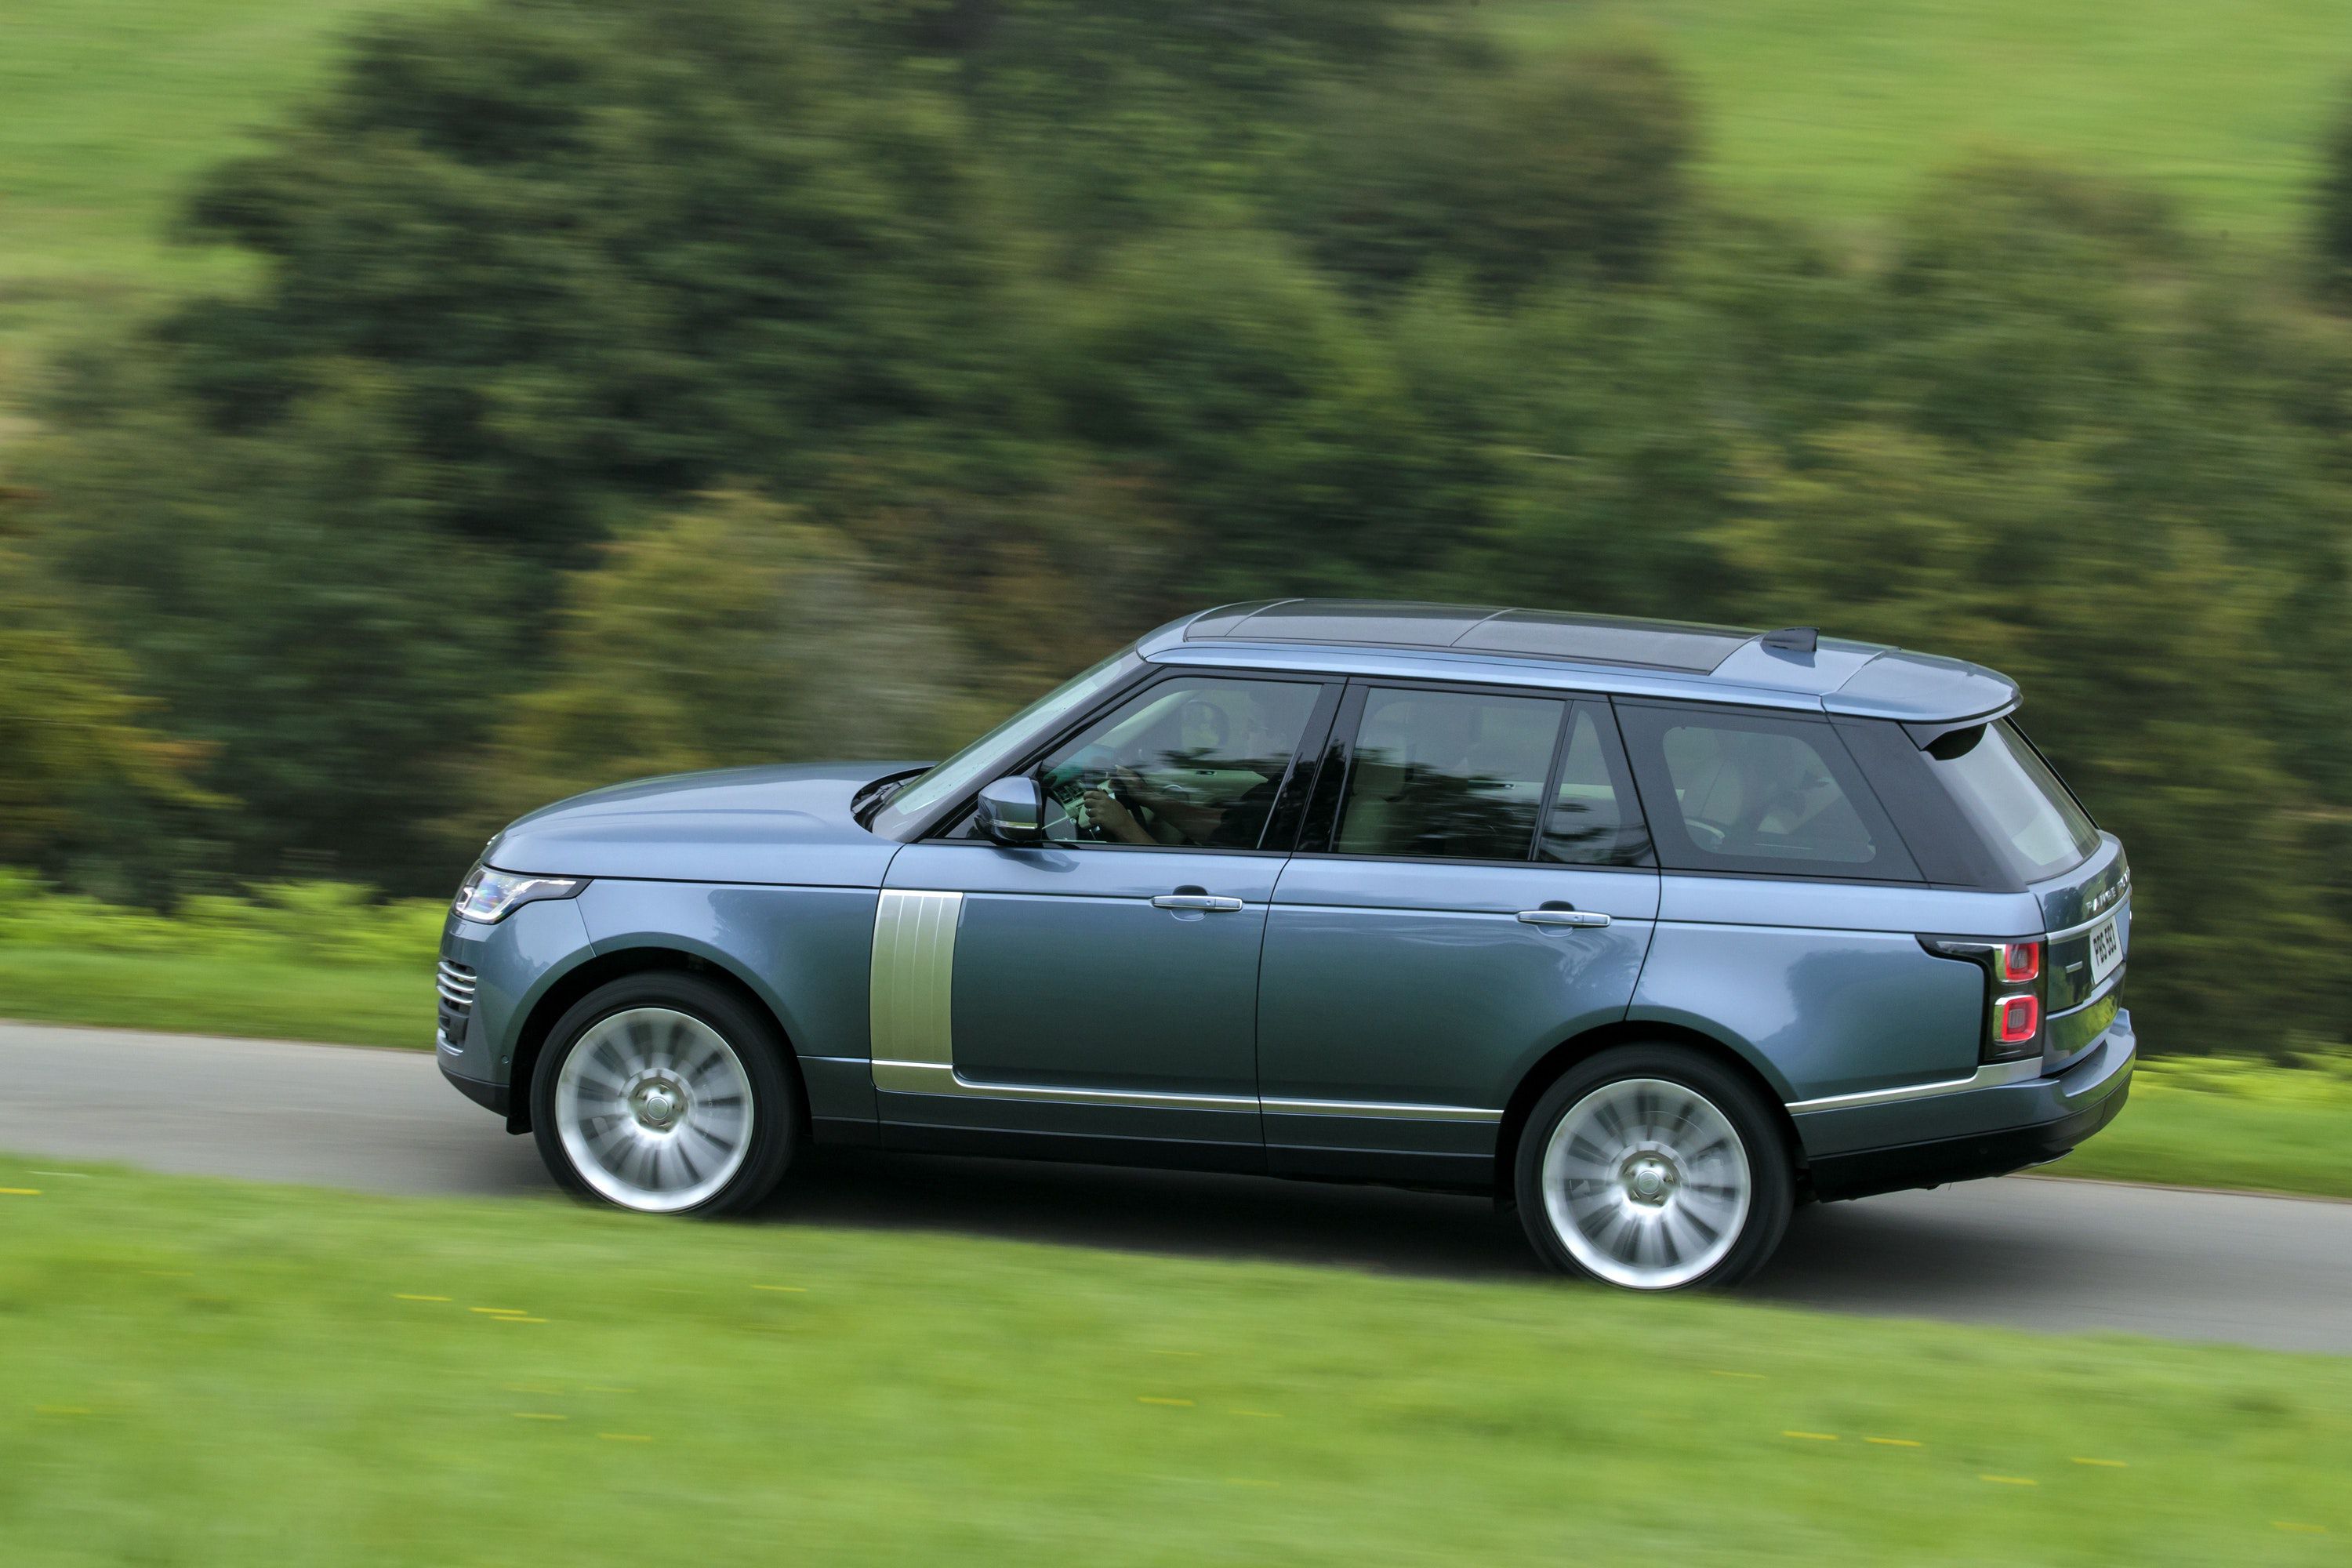 Side view of a Range Rover driving on a road